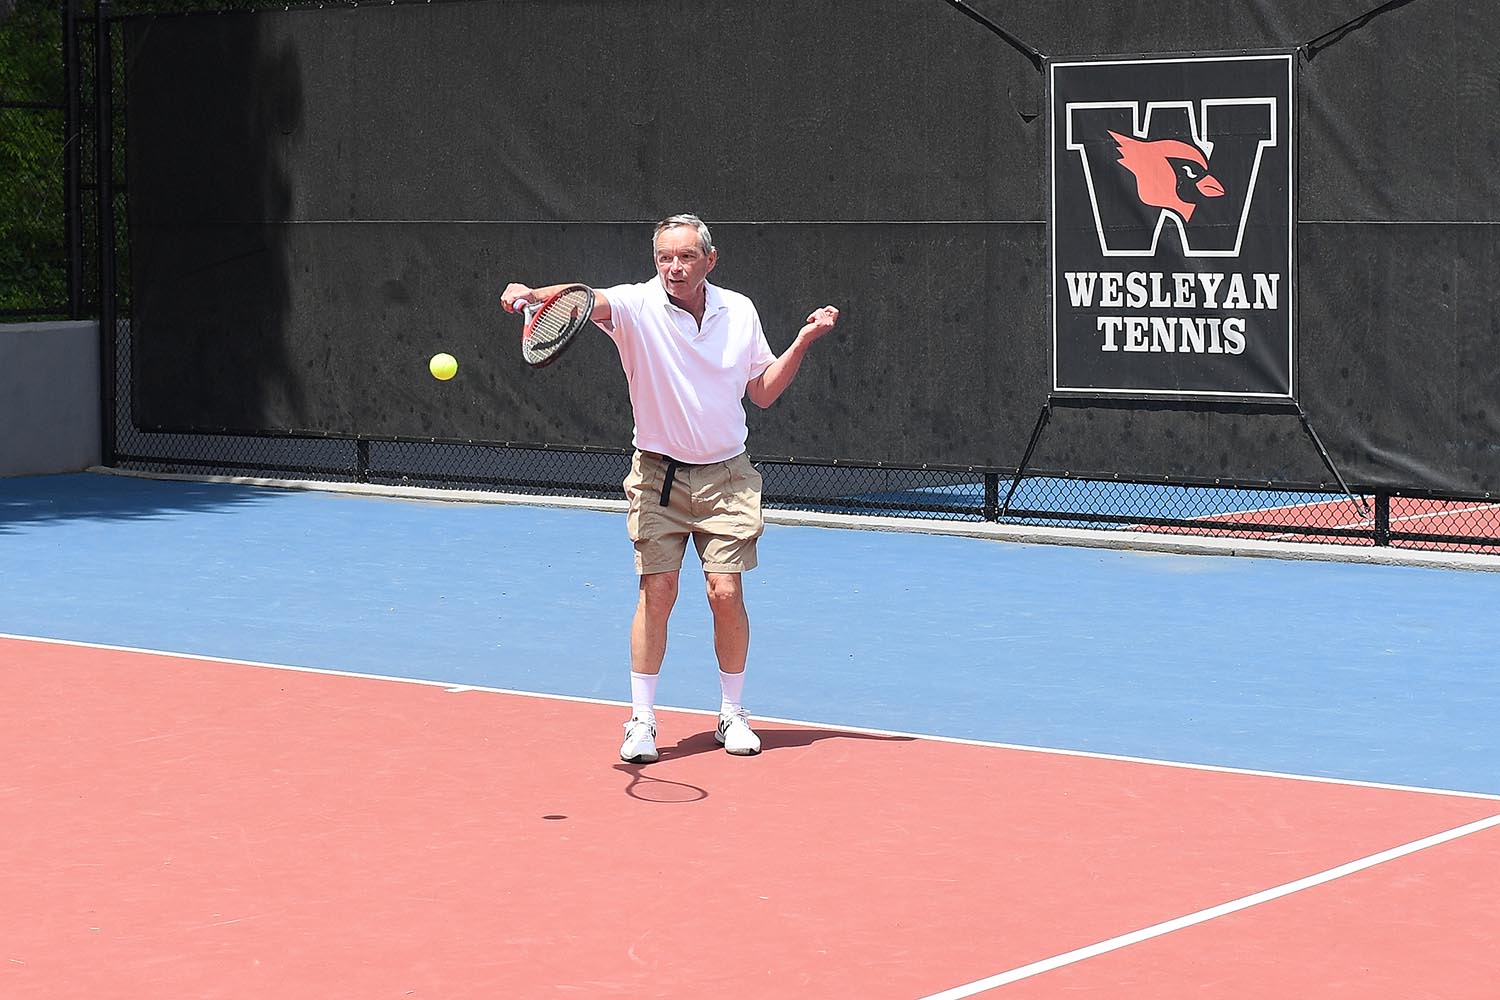 As a result of the extensive renovation, 16 new, state-of-the-art courts were created. In addition to the renovated courts, the improvements also included team benches, new windscreens, enhanced bleachers, new fencing, and cameras with the ability to live stream matches.